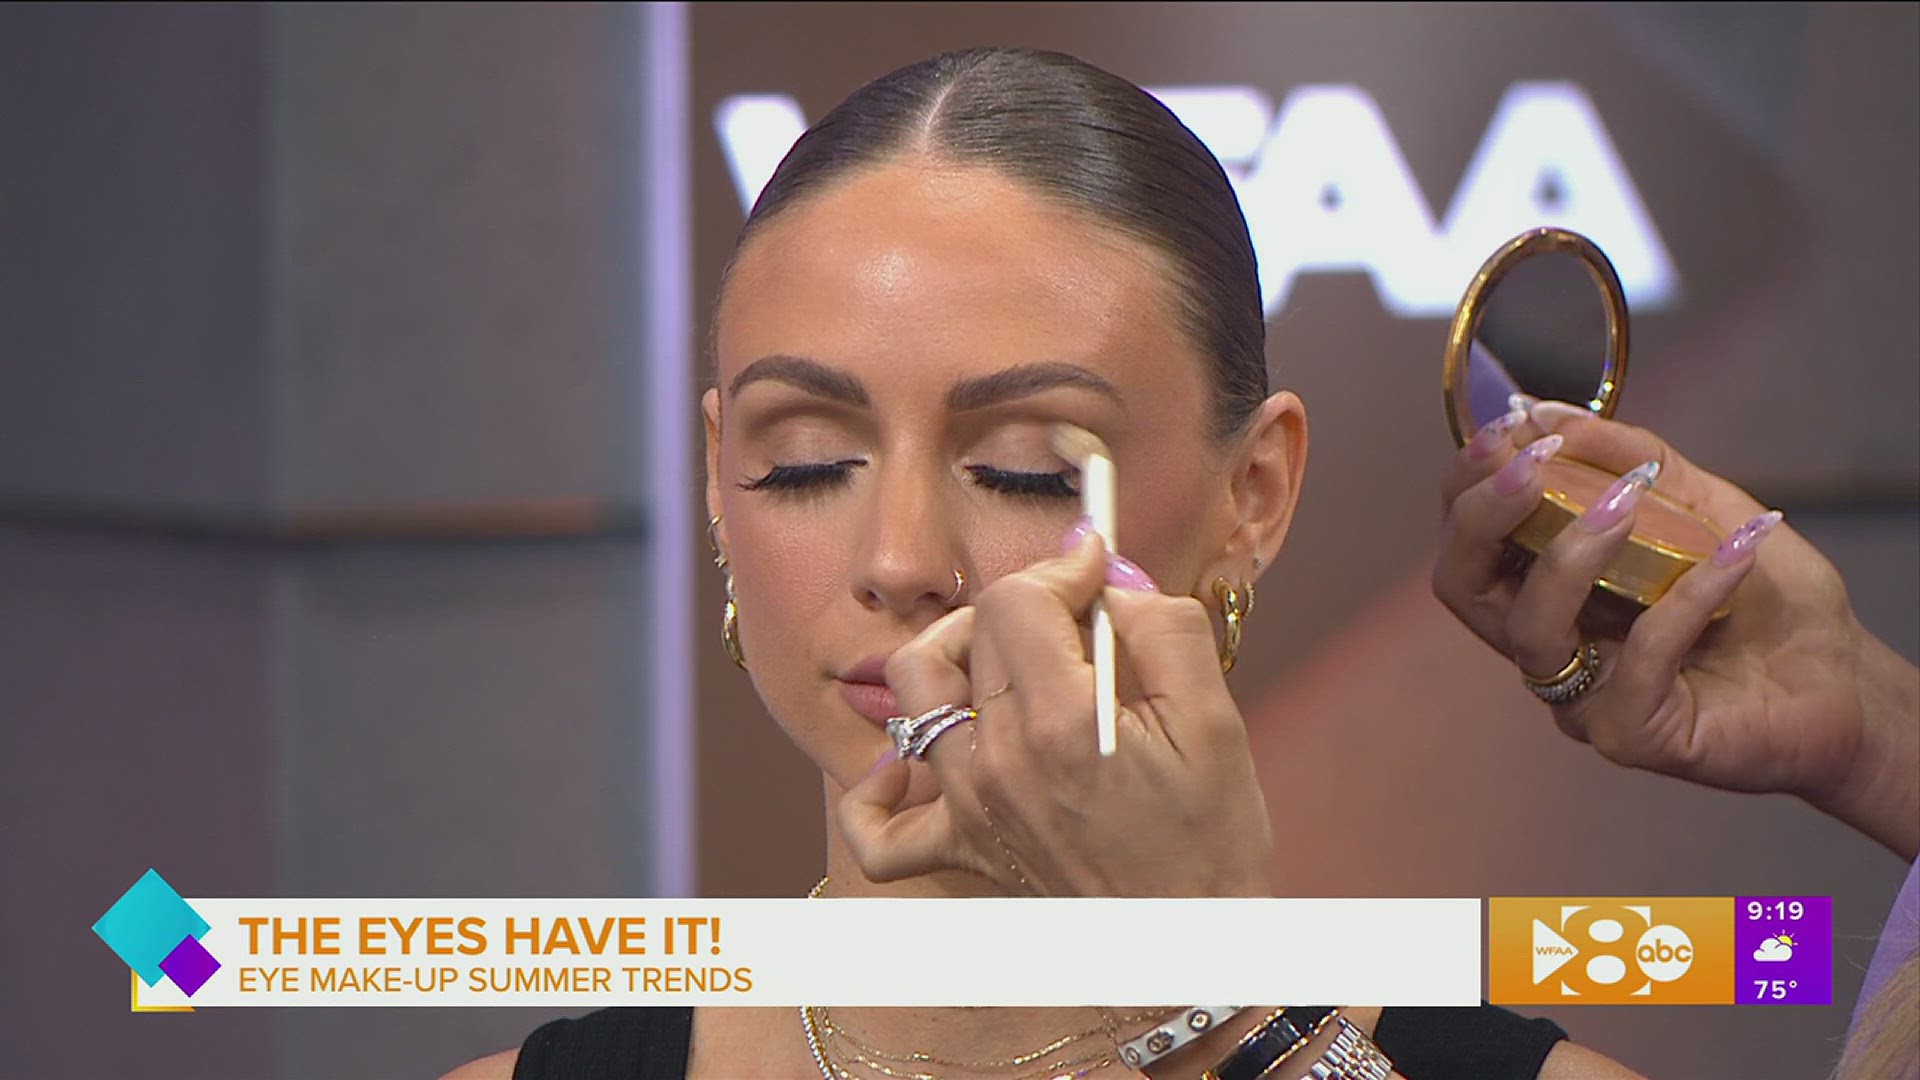 Daniela Bell of Daniela Bell Beauty shows you how to apply the hottest eye makeup trends for the summer